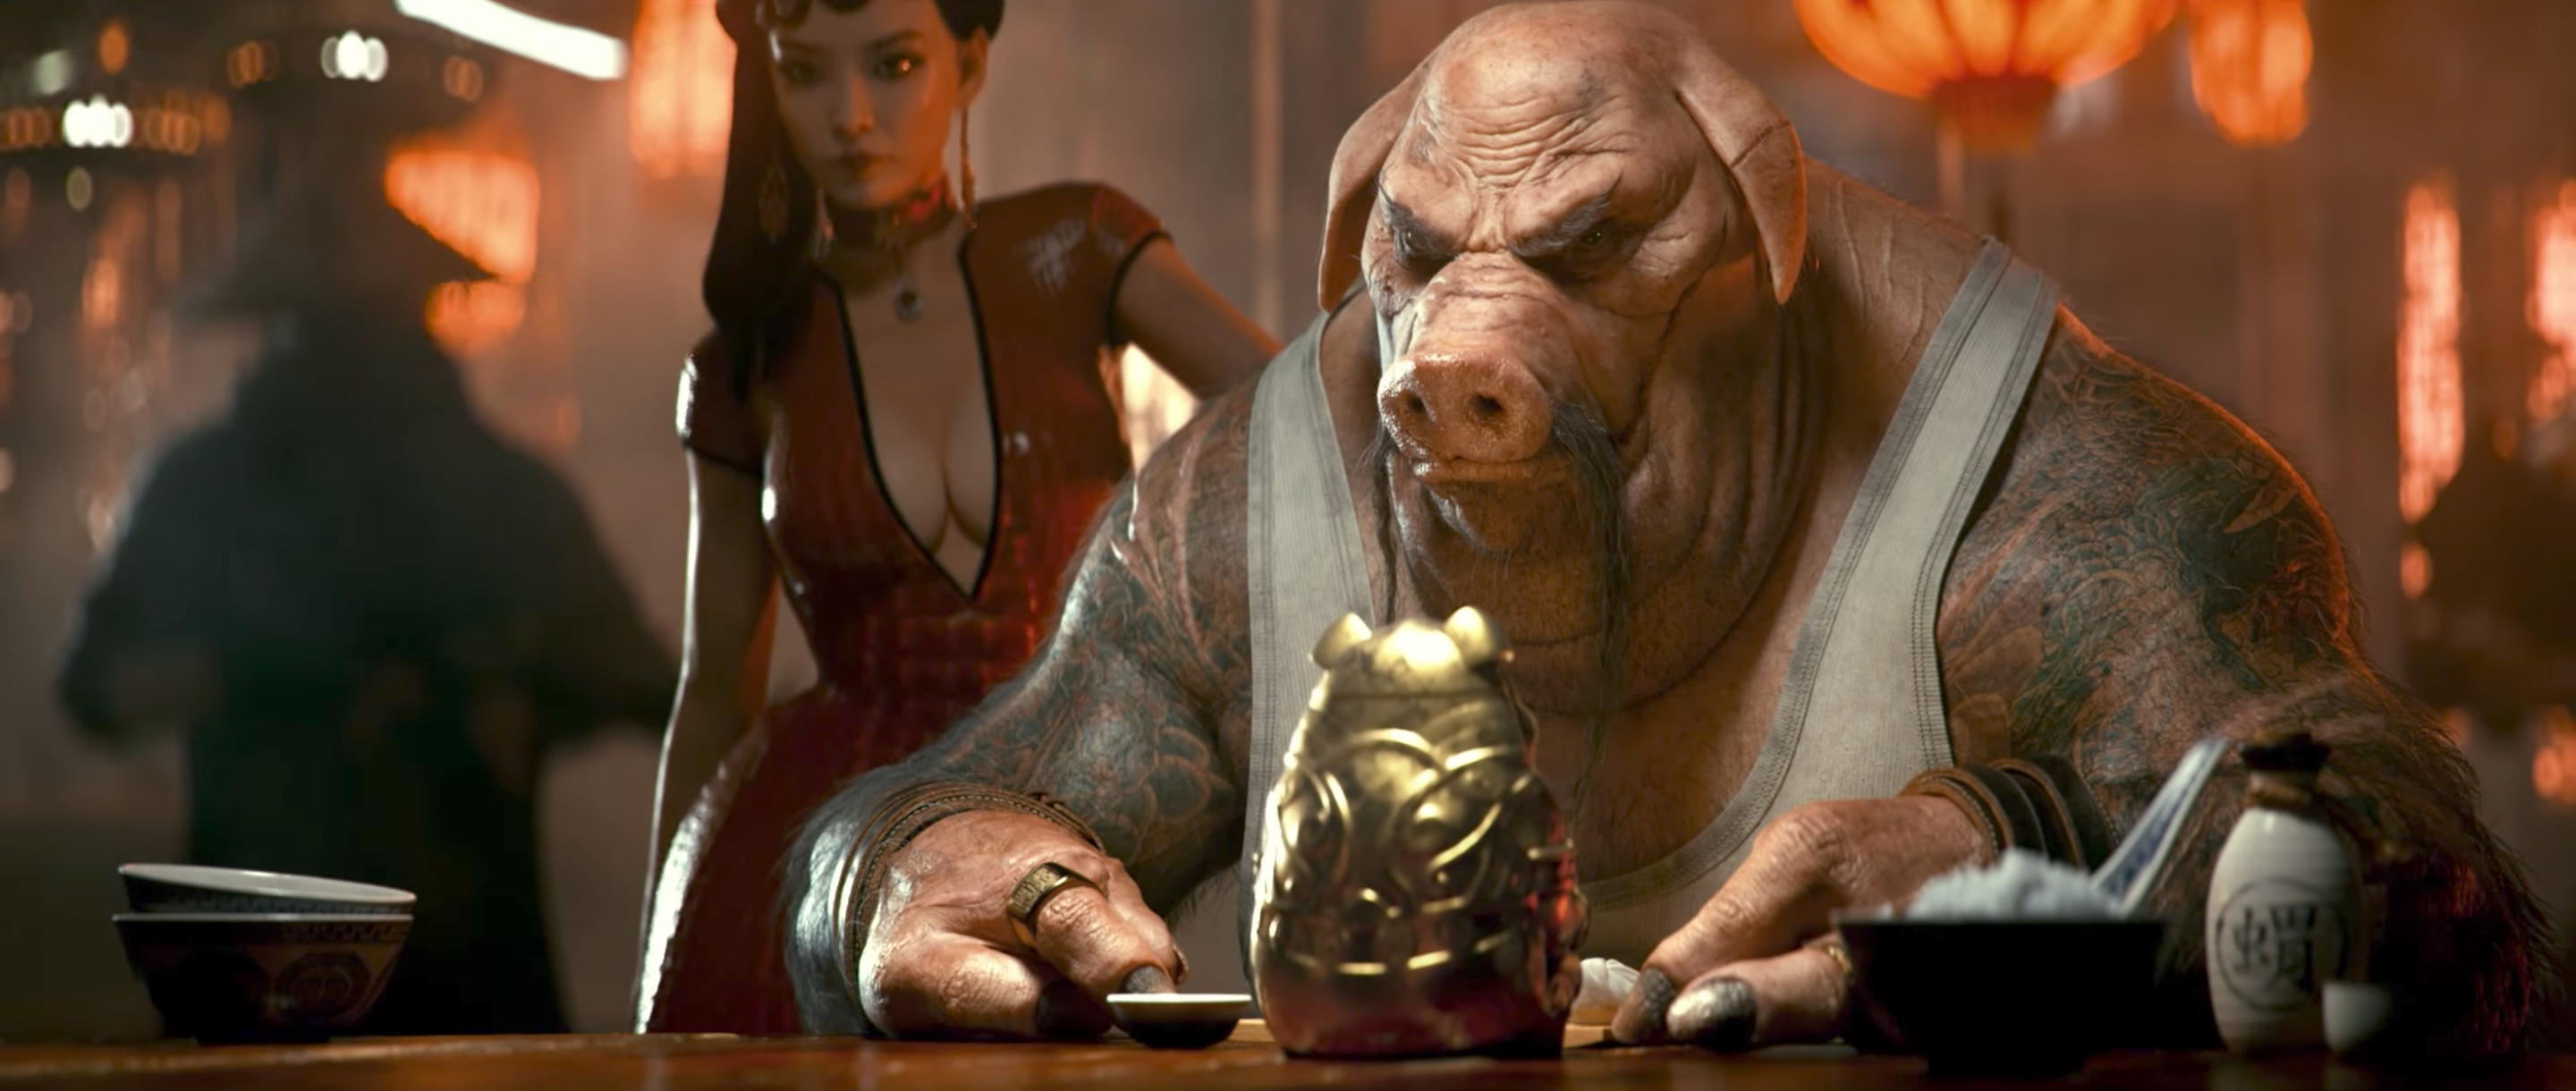 Image for Report: Michel Ancel Accused of Abusive, Disruptive Practices on Beyond Good & Evil 2